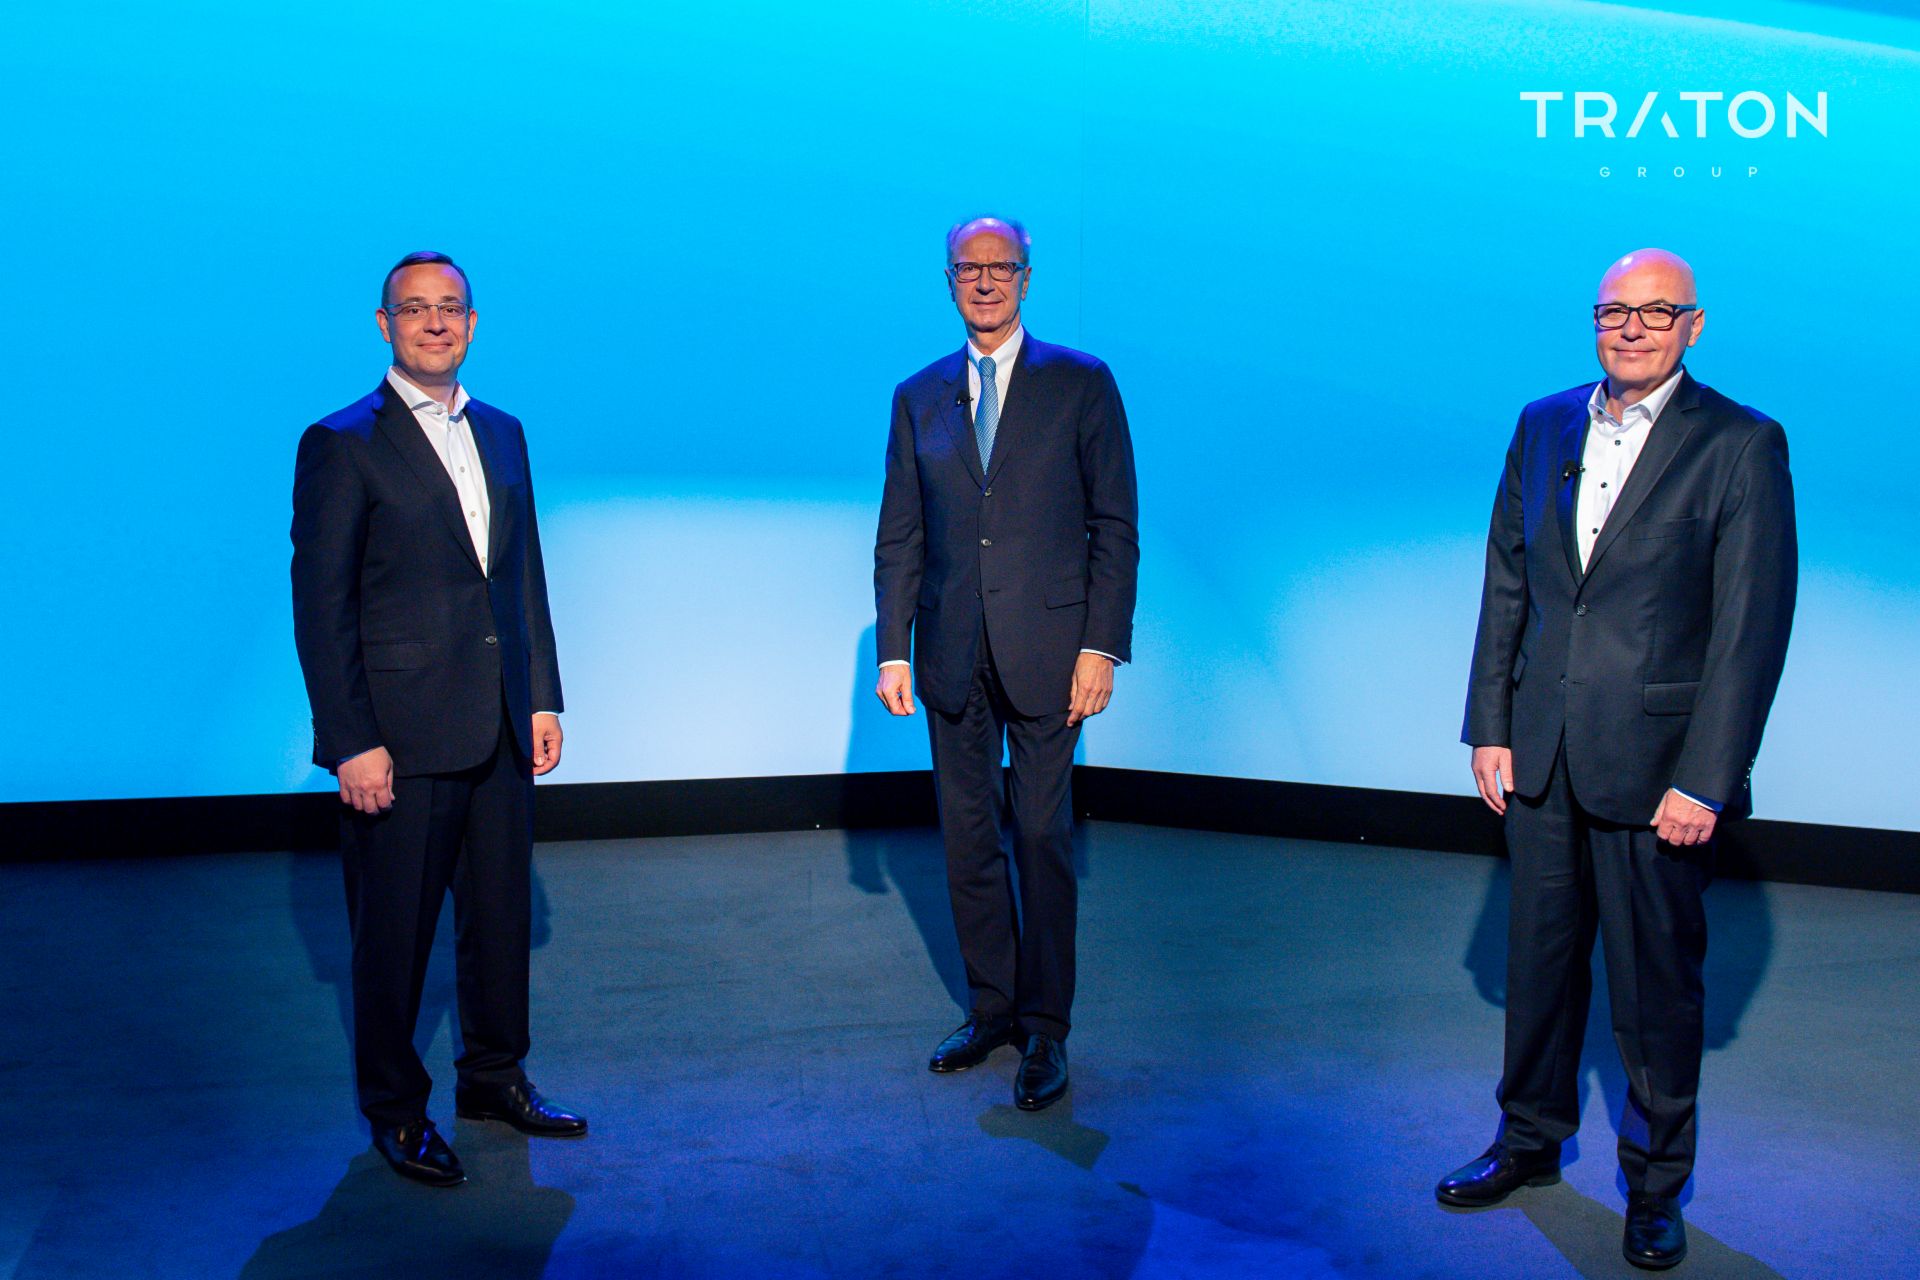 Image of CFO Christian Schulz with Hans Dieter Pötsch, Chairman of the Supervisory Board of TRATON SE, and CEO Matthias Gründler at the Annual General Meeting of TRATON SE